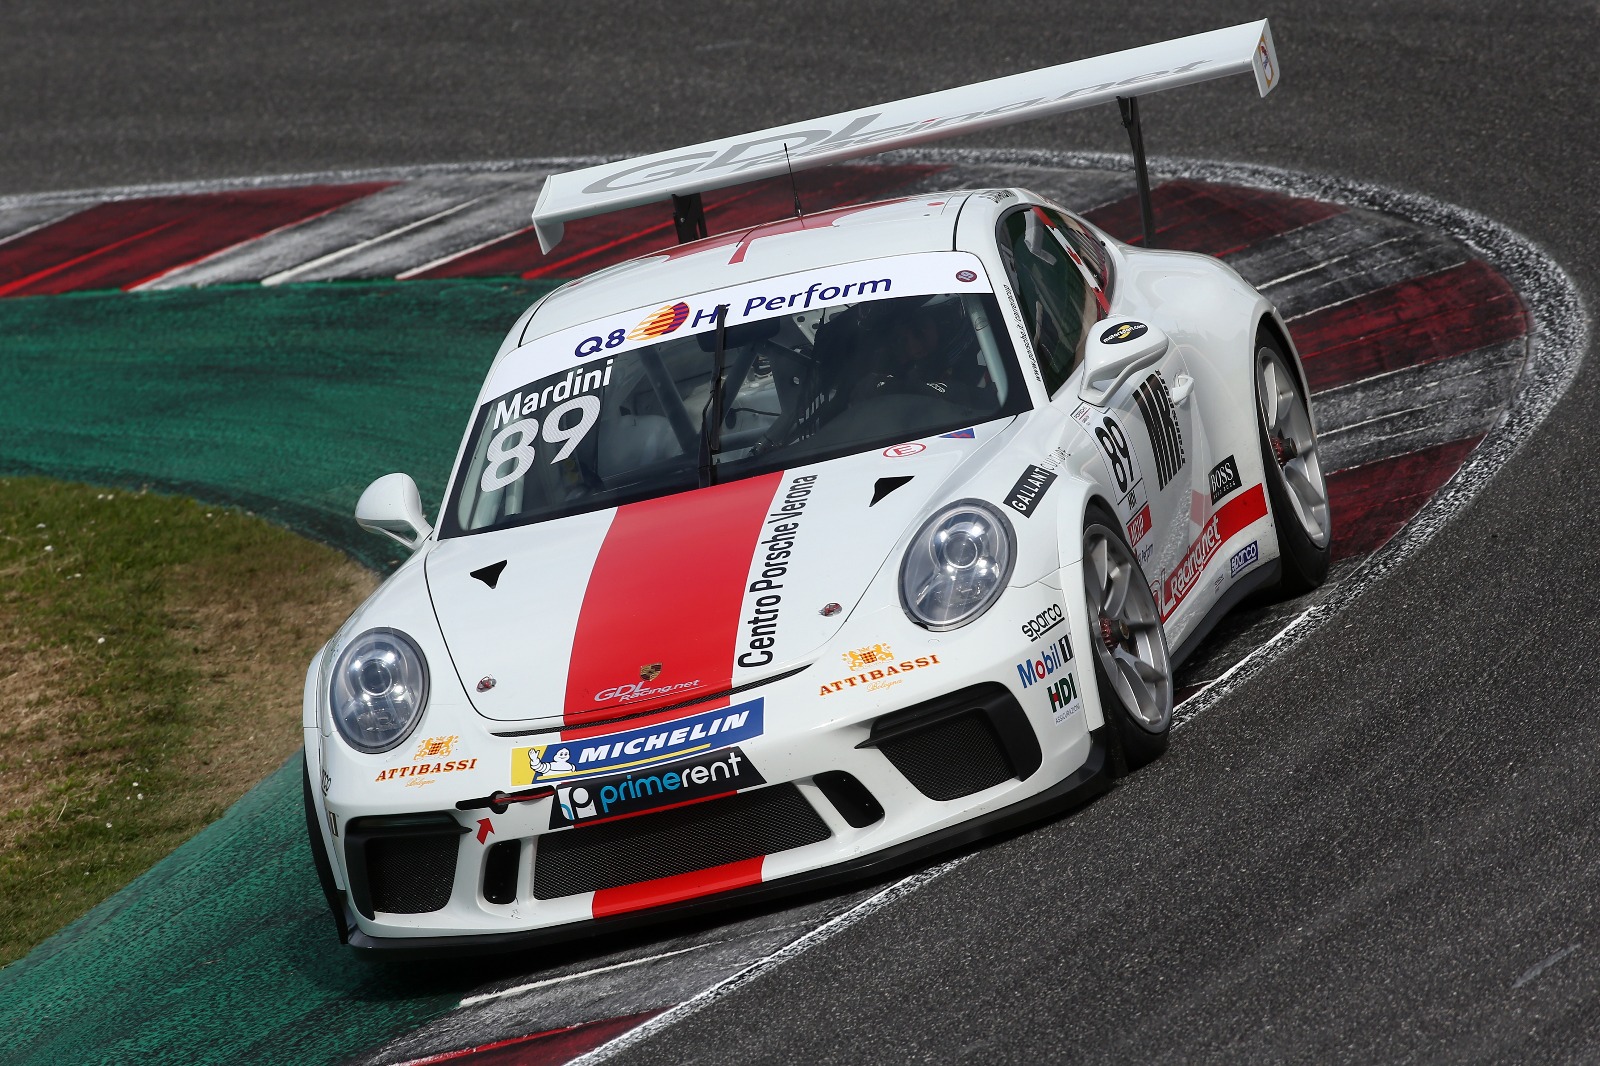 Carrera Cup Italia, GDL Racing’s Mardini completes stunning recovery in Misano to confirm his Michelin Cup lead